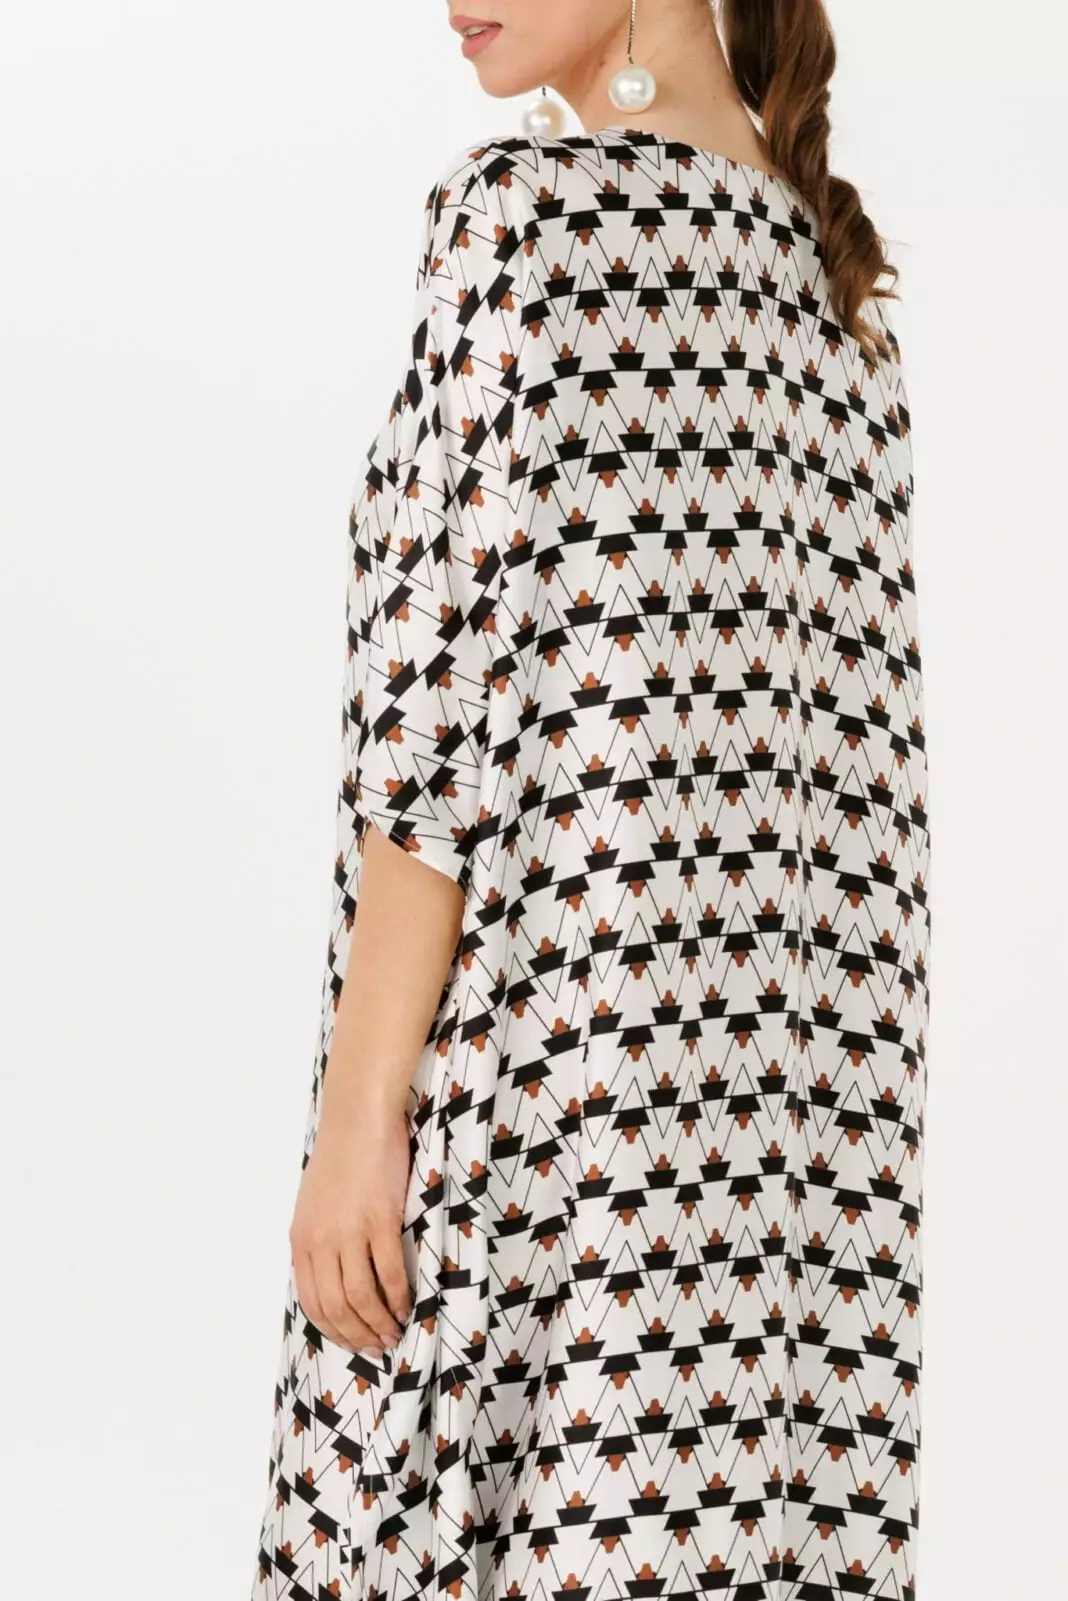 Geometric print Aztec inspired pattern vacation wear balck and white beach wear by house of Azoiia